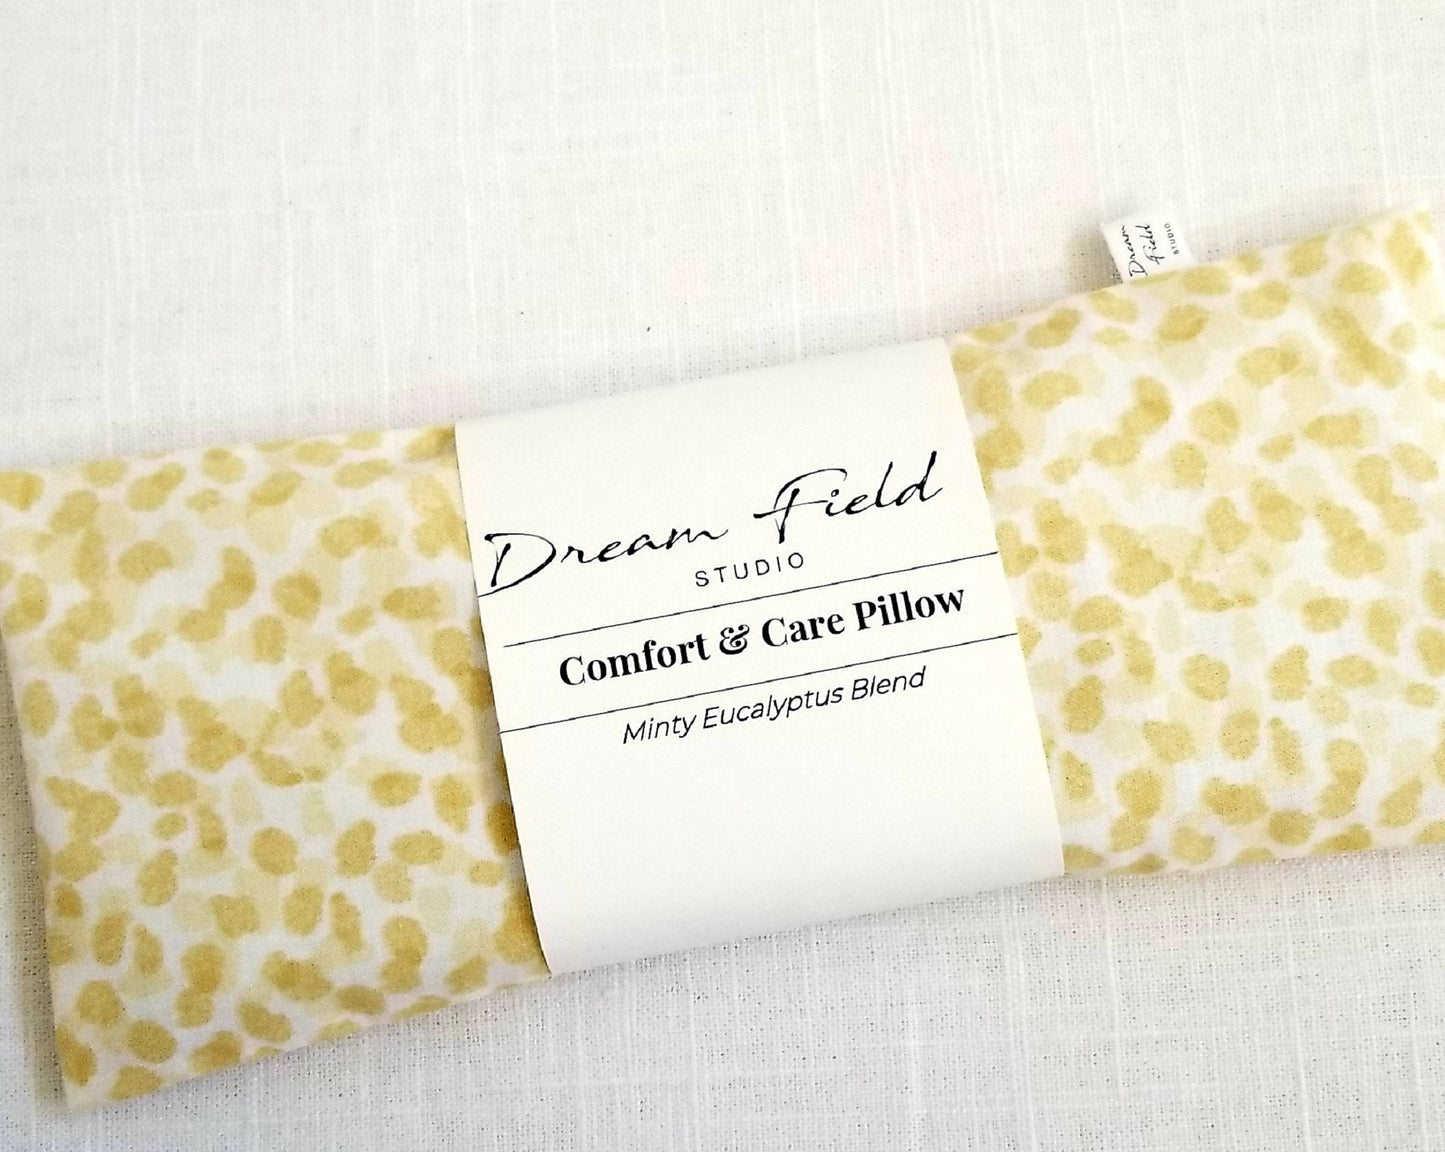 Weighted Eucalyptus Eye Pillow with Washable Organic Cover - Yellow Spa Print